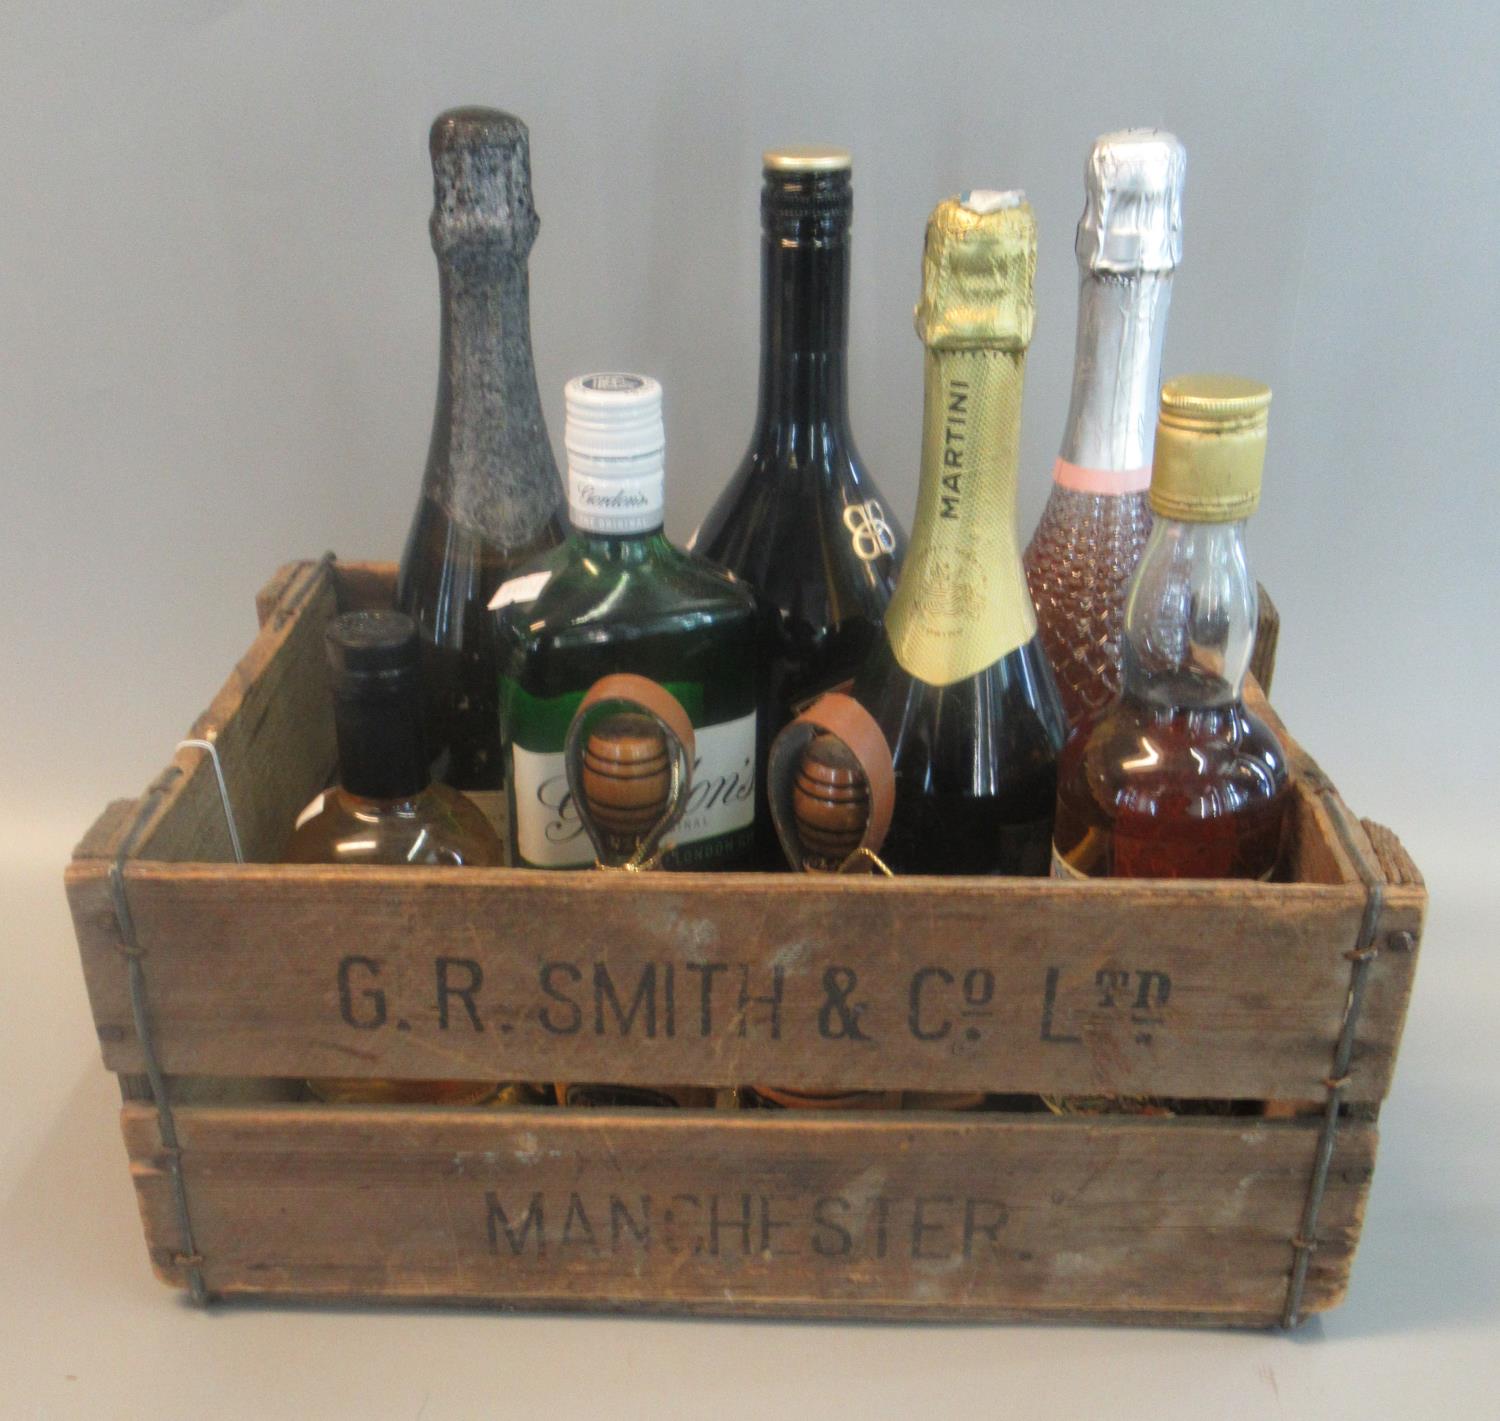 Wooden G.R Smith & Co. Ltd. crate containing bottles of alcohol to include: Gordons Gin, M&S